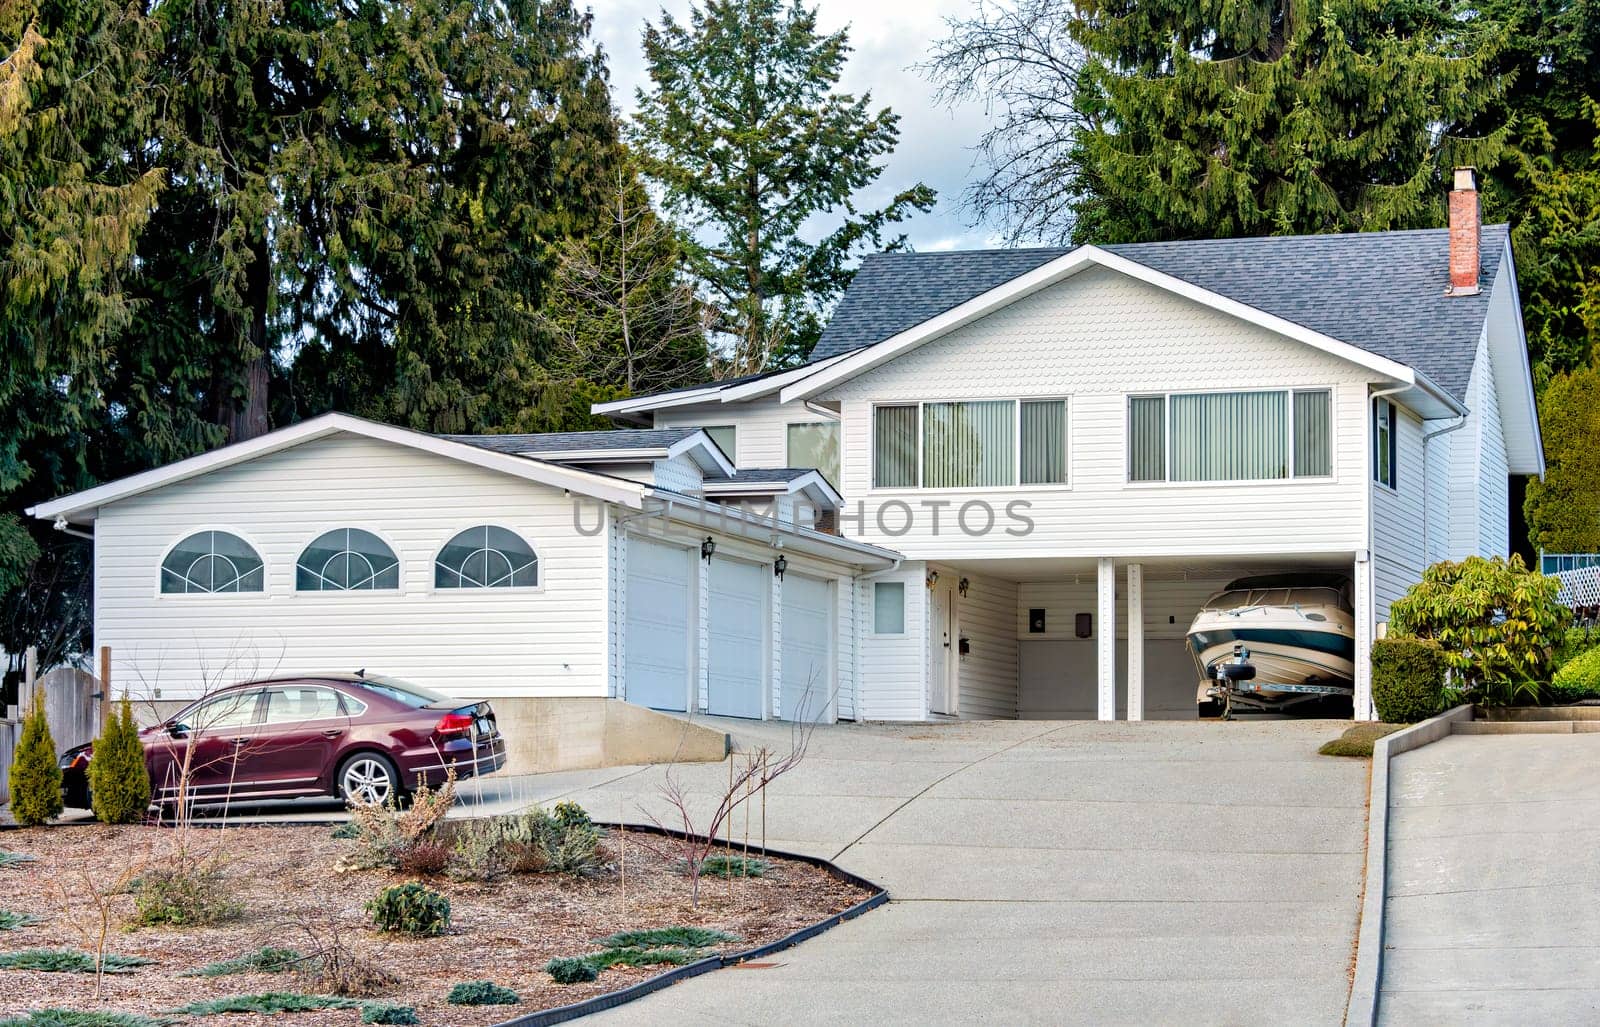 Suburban family house with small boat on trailer parked under carport. Big residential house with car parked on concrete driveway.